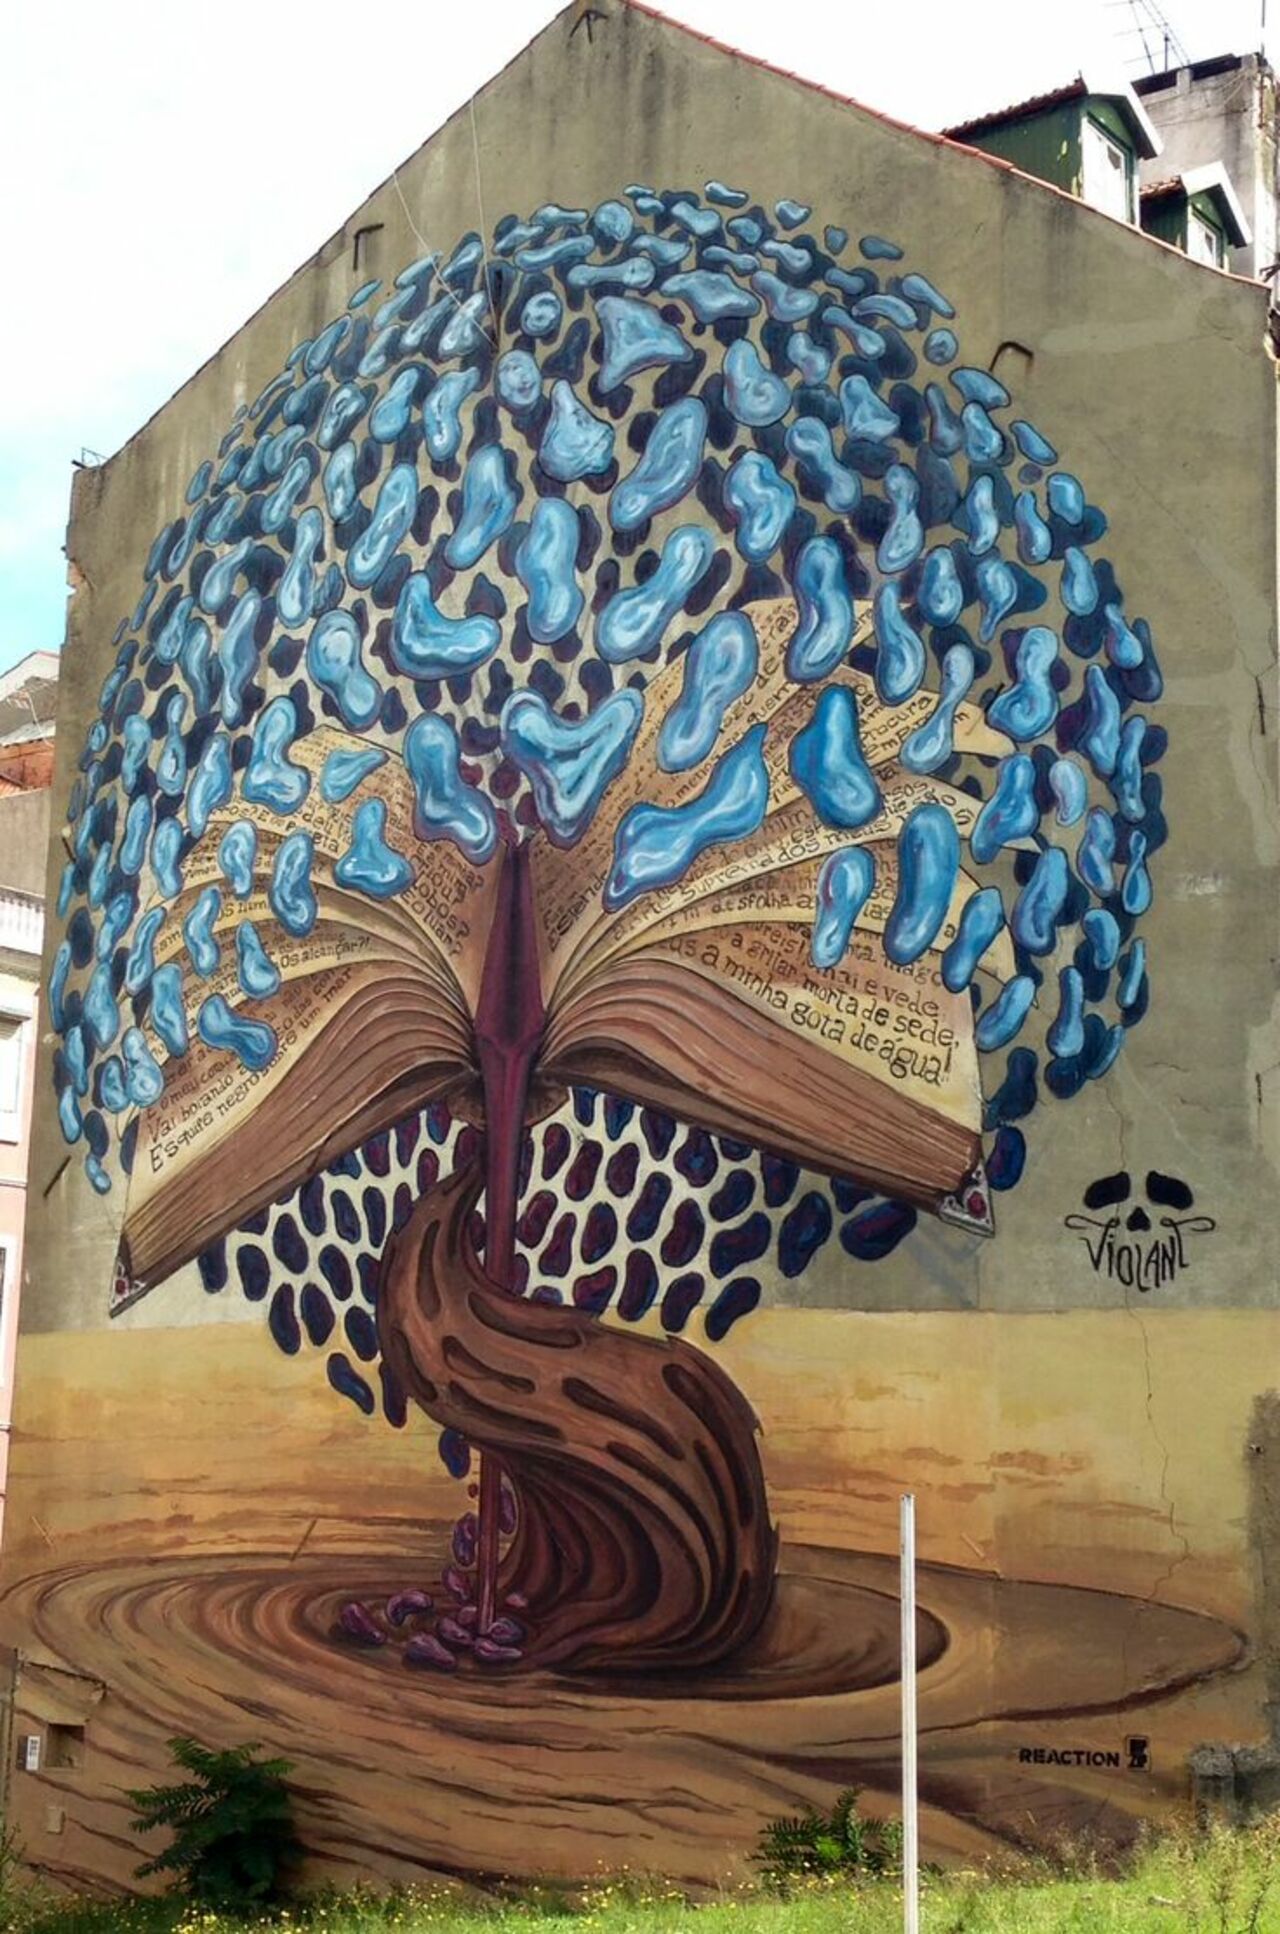 RT @aPlace4Creation: #Graffiti in #Lisbon. Photo by Vika. #BigArtBoost #StreetArt http://buff.ly/17JEmYT http://t.co/P7oXpR4UcR